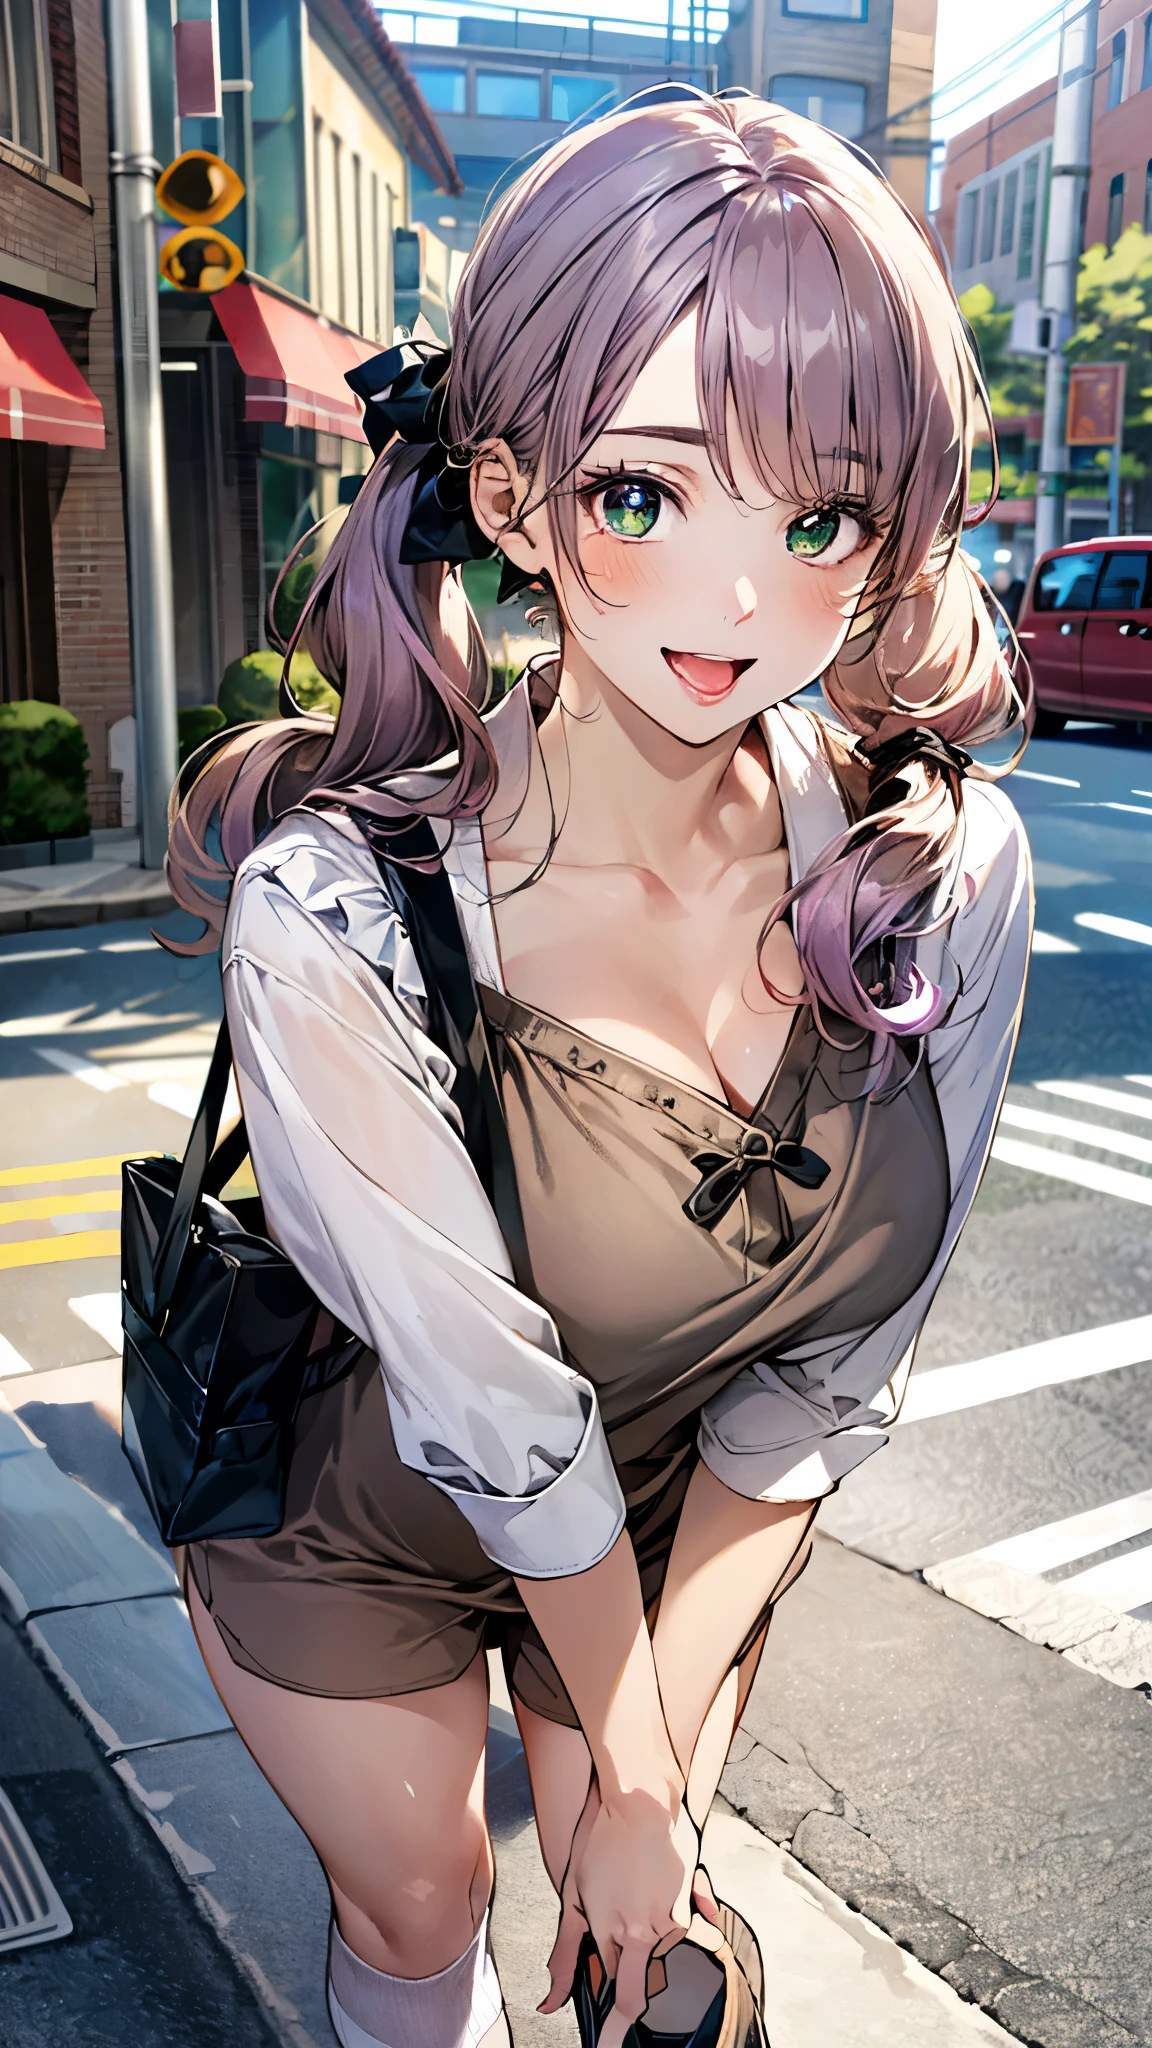 (masterpiece:1.3, top-quality, ultra high res, ultra detailed), (realistic, photorealistic:1.4), beautiful illustration, perfect lighting, natural lighting, colorful, depth of fields, 
looking at viewer, full body, 1 girl, japanese, high school girl, perfect face, (perfect anatomy), cute and symmetrical face, baby face, shiny skin, , 
(long hair:1.5, low twintails:1.5, light purple hair), swept bangs, emerald green eyes, drooping eyes, big eyes, long eye lasher, (large breasts, tight butt, seductive thighs), , 
beautiful hair, beautiful face, beautiful detailed eyes, beautiful clavicle, beautiful body, beautiful chest, beautiful thigh, beautiful legs, beautiful fingers, 
((detailed cloth texture, v-neck brown dress, white ruffle stand collared candy sleeve blouse), pink hair chouchou, ), beige tote bag,
(beautiful scenery), day time, (downtown) walking,  (happy smile, open mouth), 